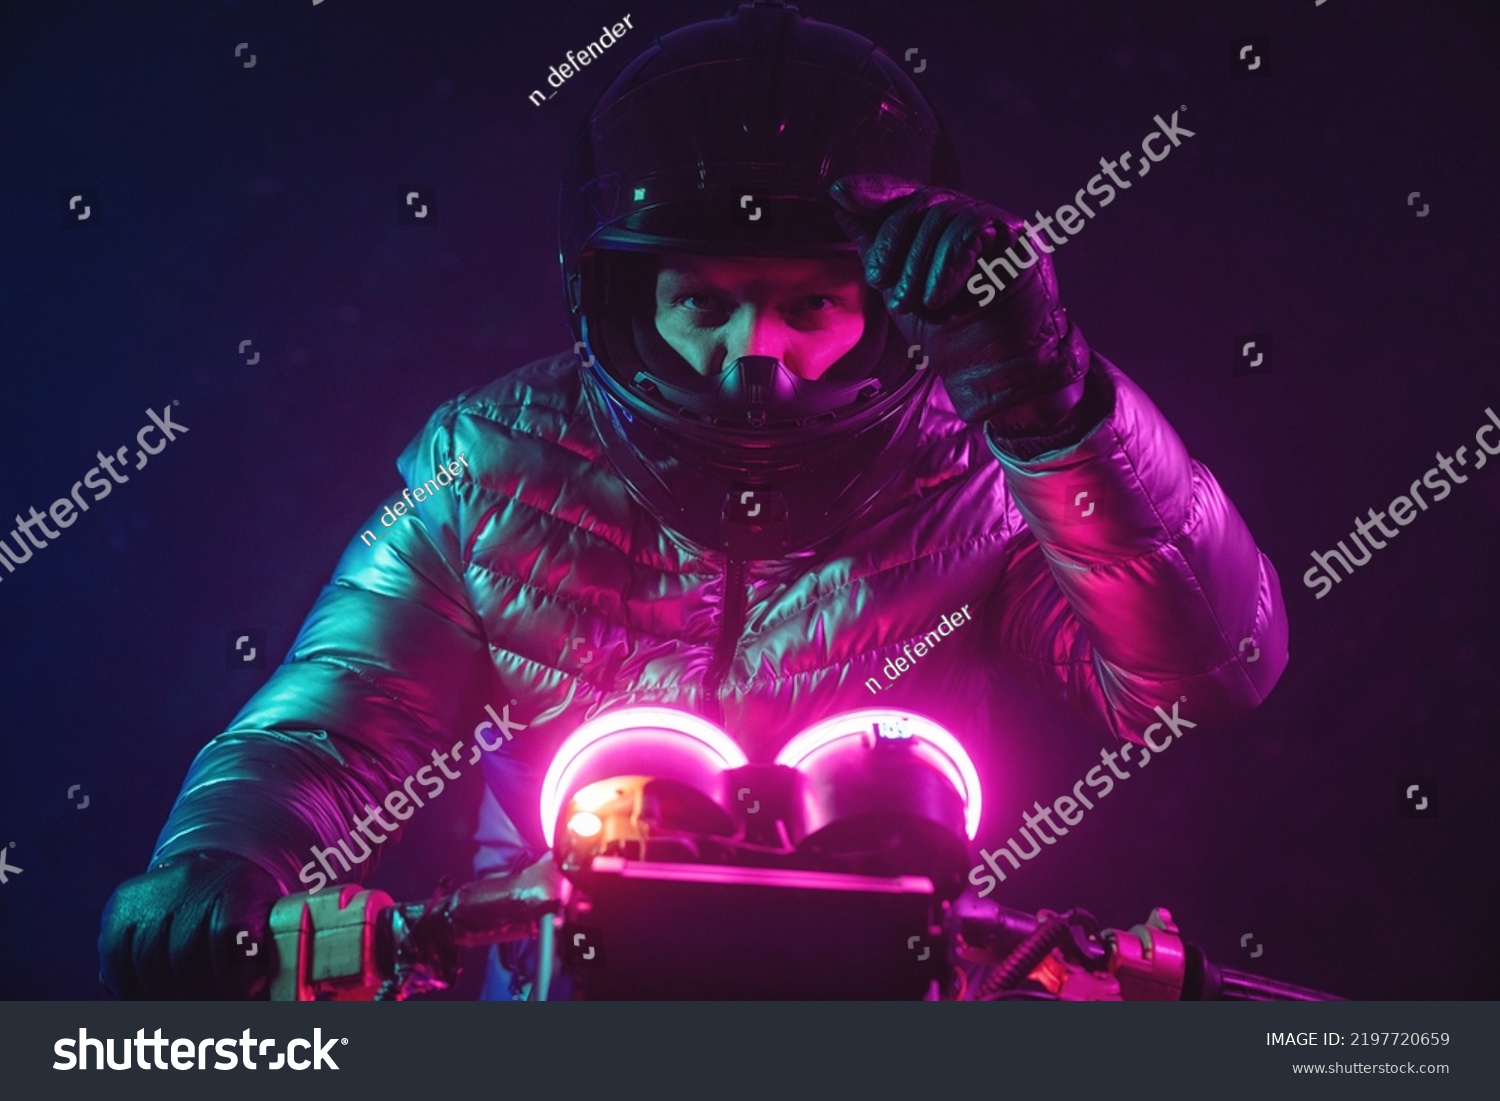 A futuristic motorbiker on the neon light motorcycle close up. #2197720659